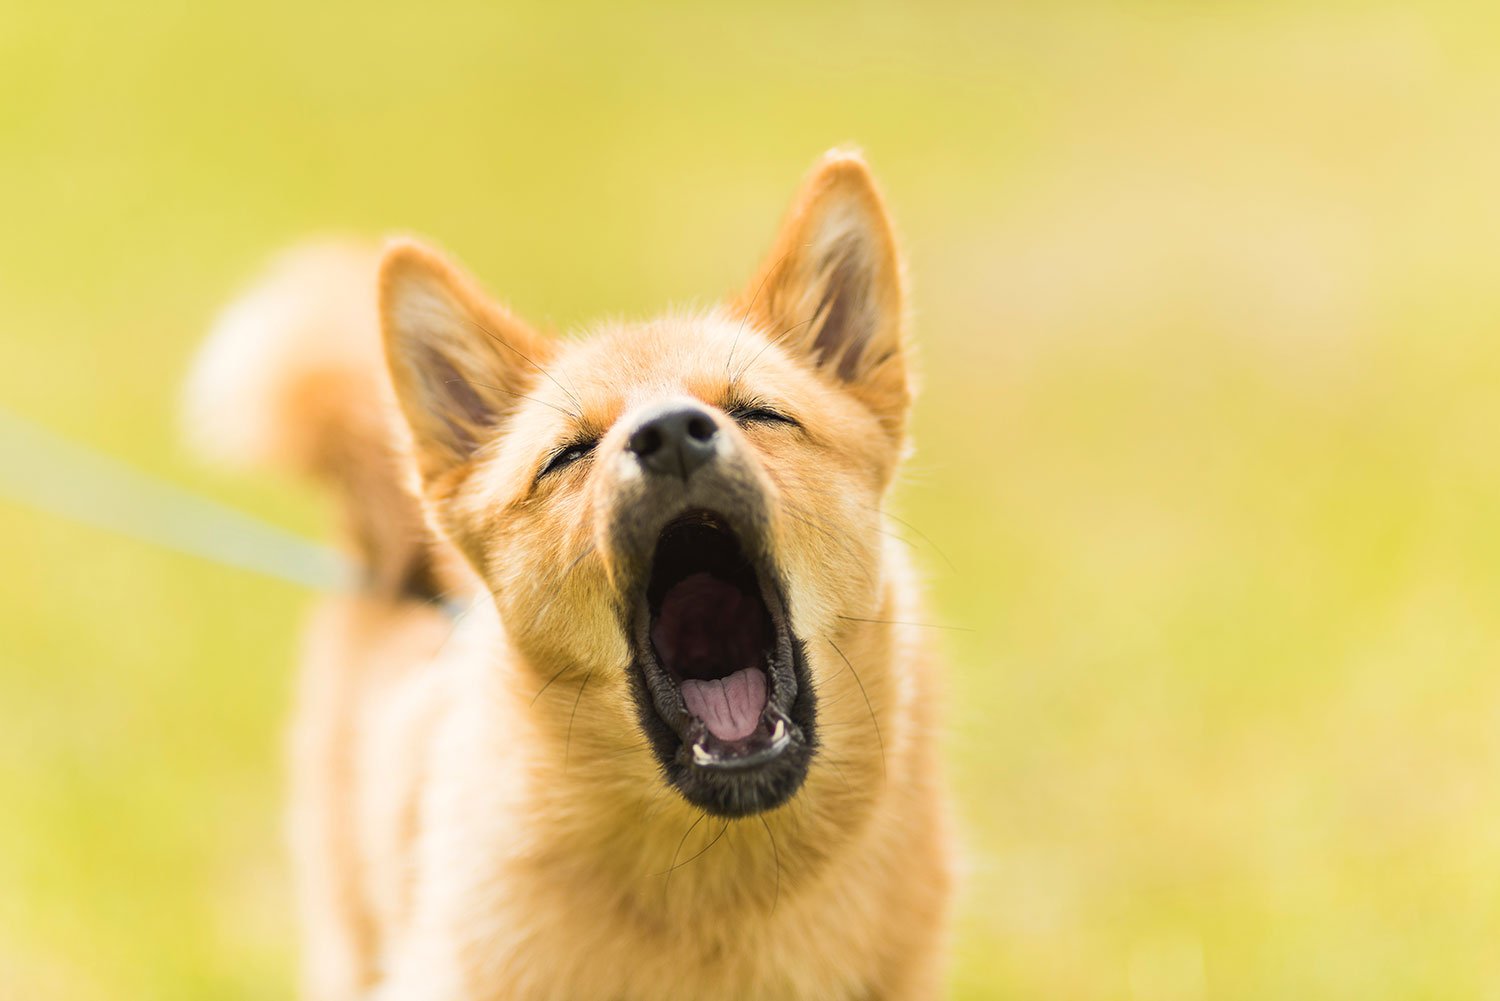 How to prevent excessive dog barking